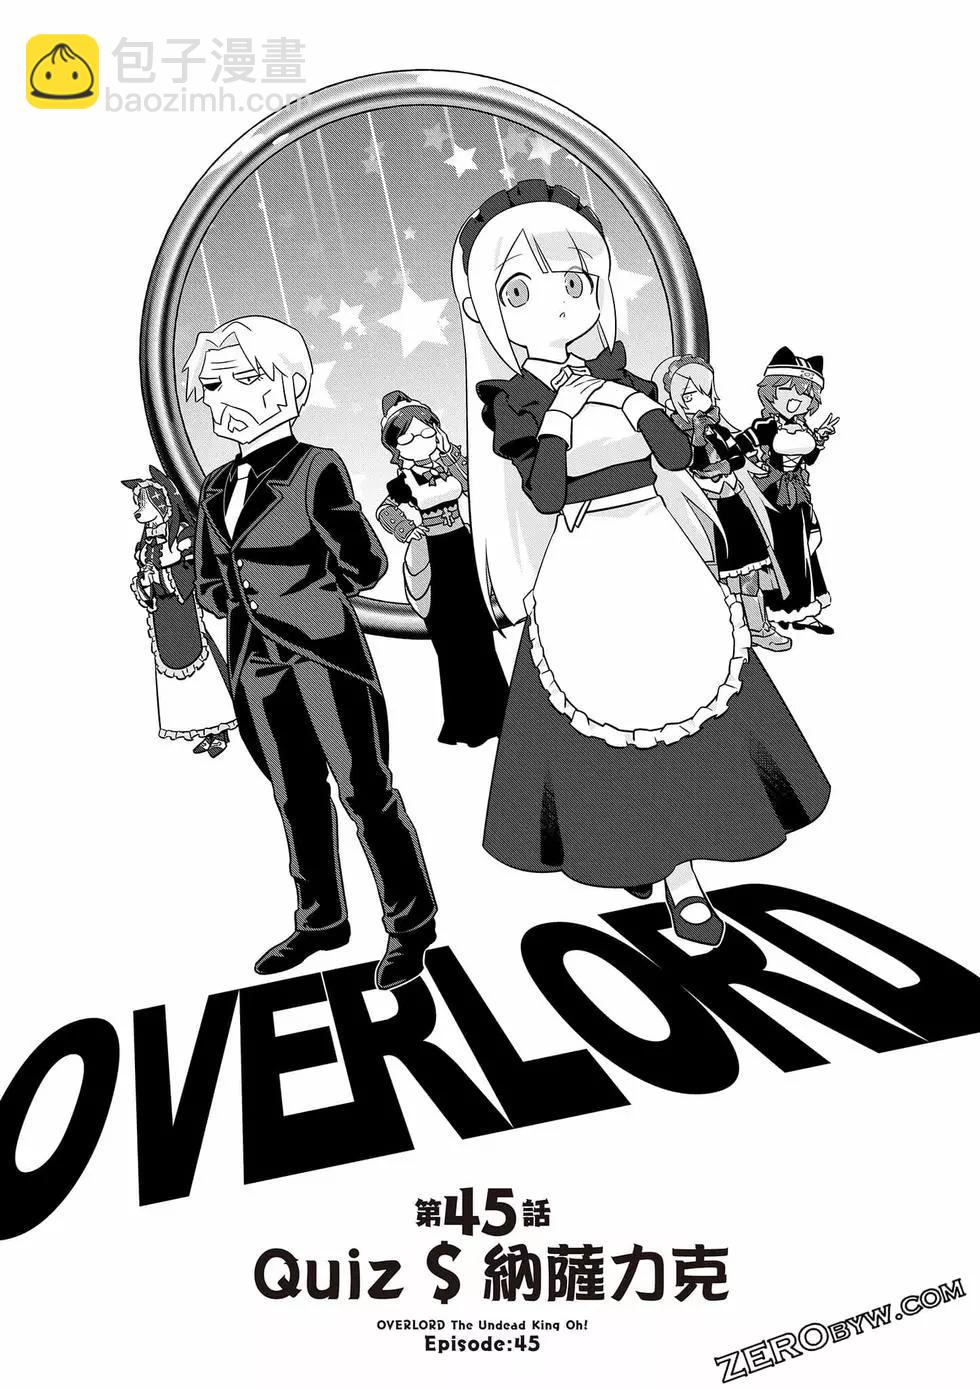 Overlord不死者之OH！ - 第08卷(1/3) - 6